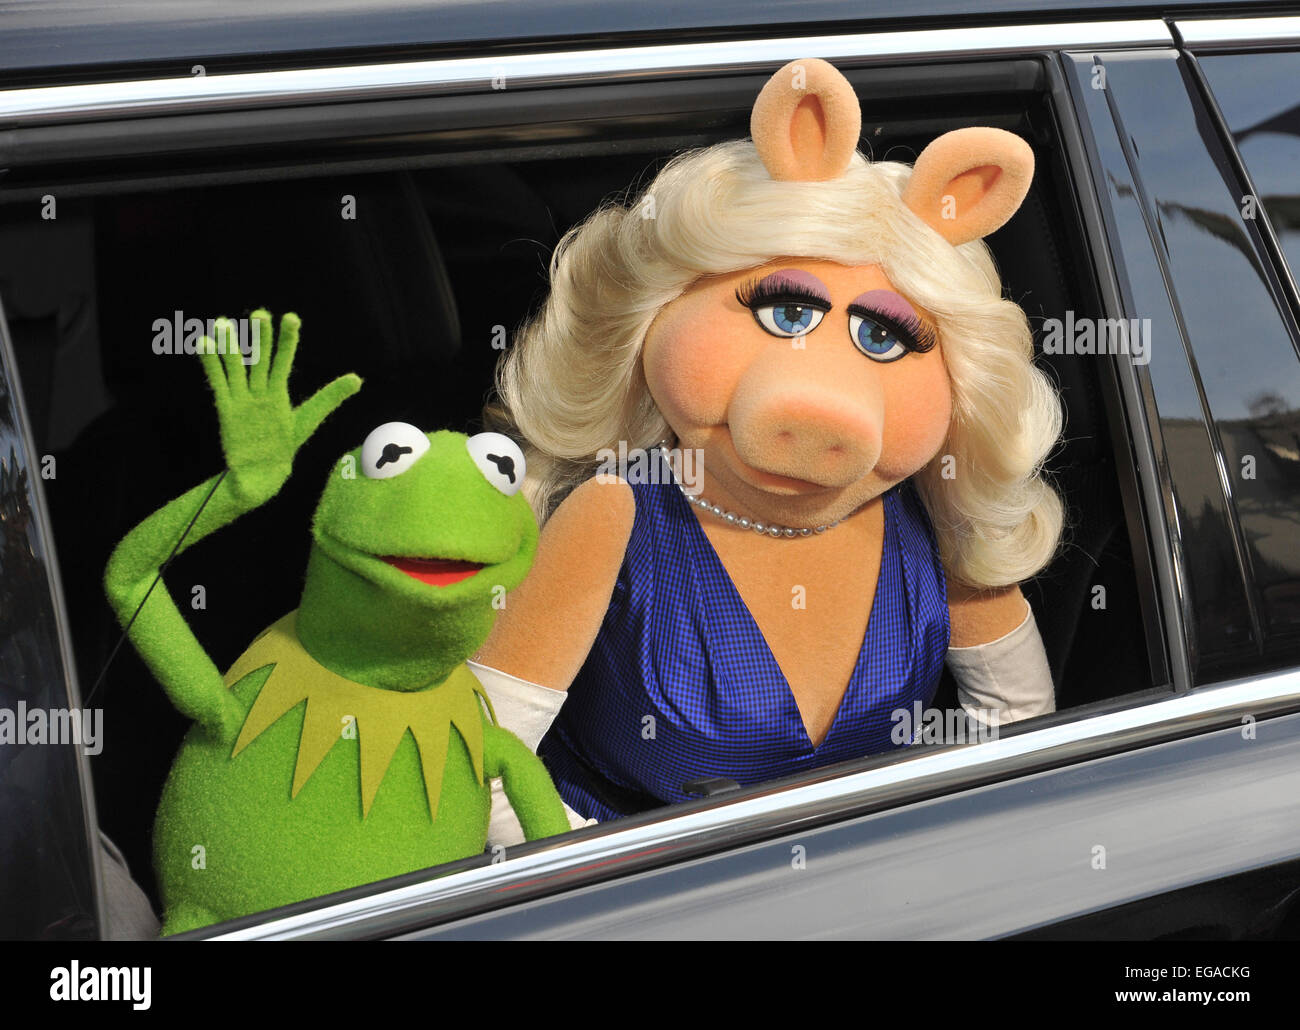 LOS ANGELES, CA - MARCH 11, 2014: Muppets' characters Kermit the Frog & Miss Piggy at the world premiere of their movie Disney's 'Muppets Most Wanted' at the El Capitan Theatre, Hollywood. Stock Photo